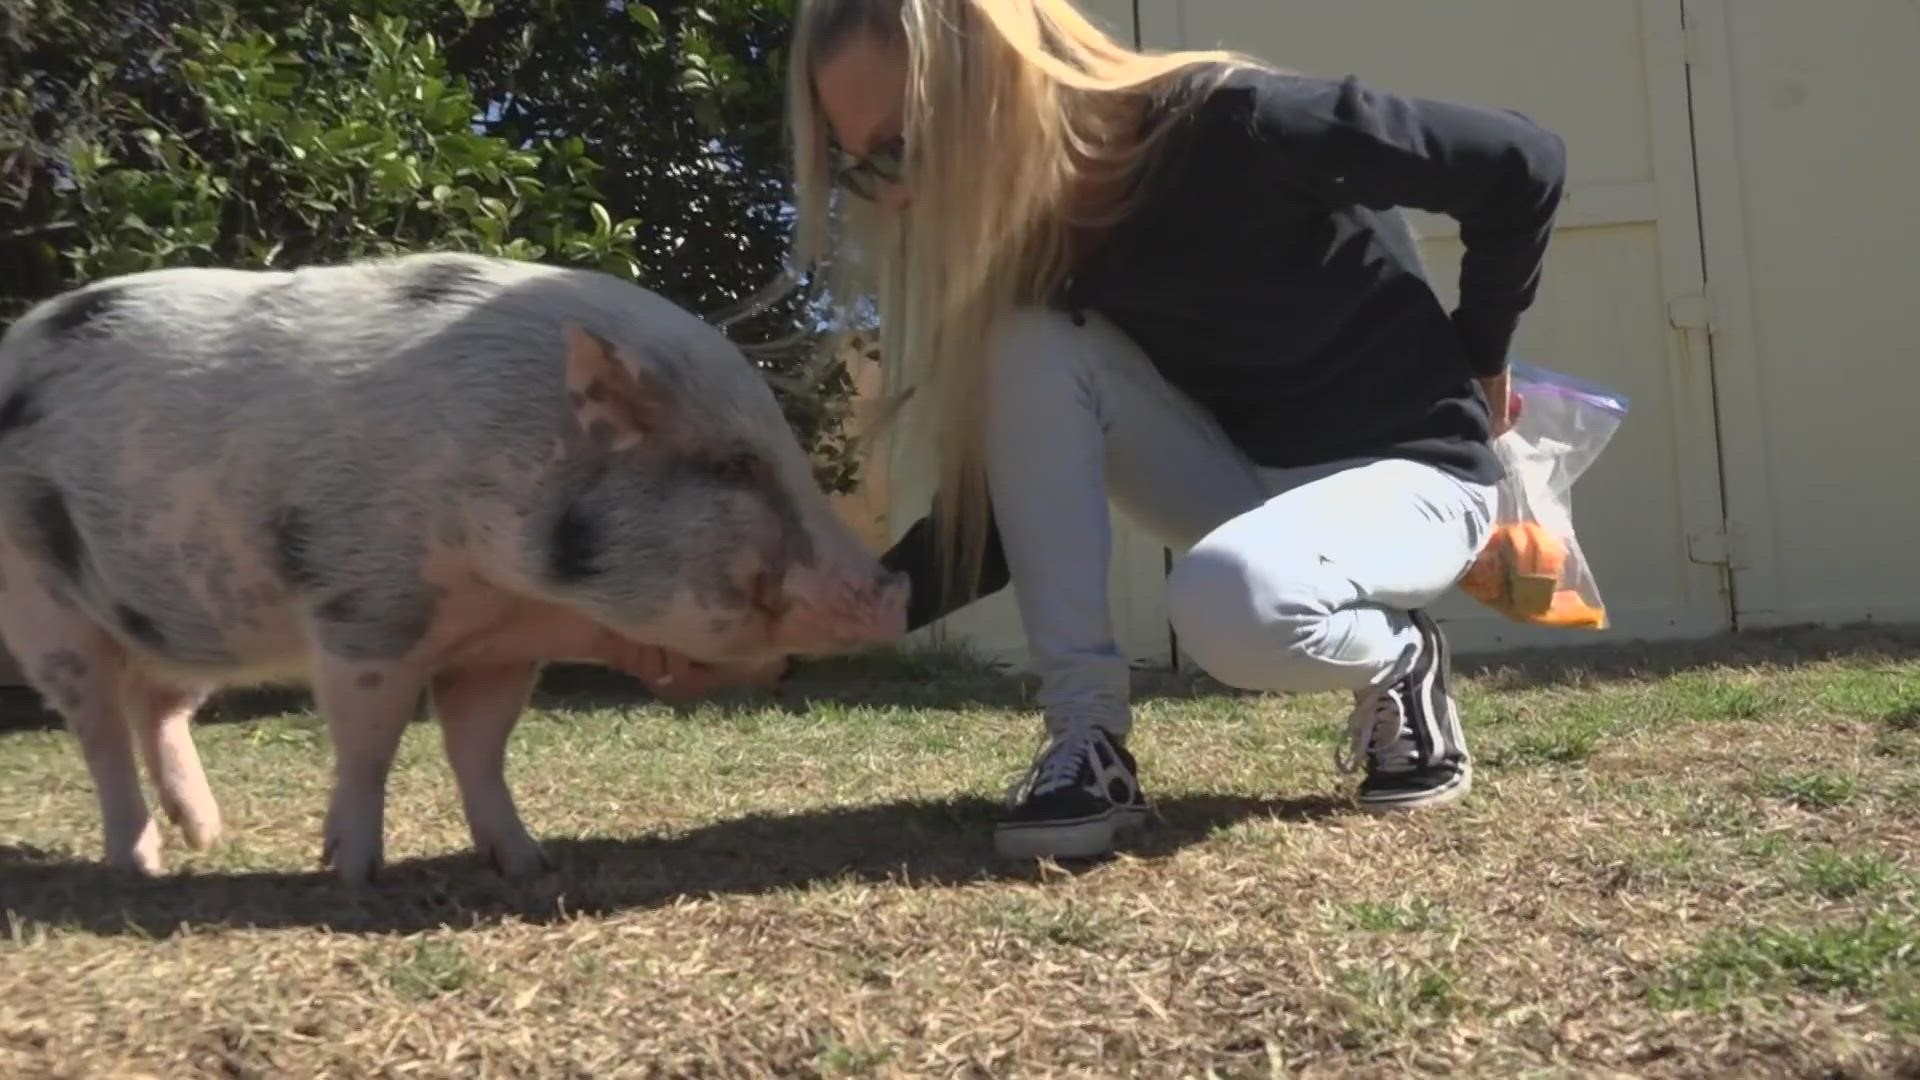 While Holly Scehnet has taken her pet pig of three years all over the country, she never knew if he could swim.